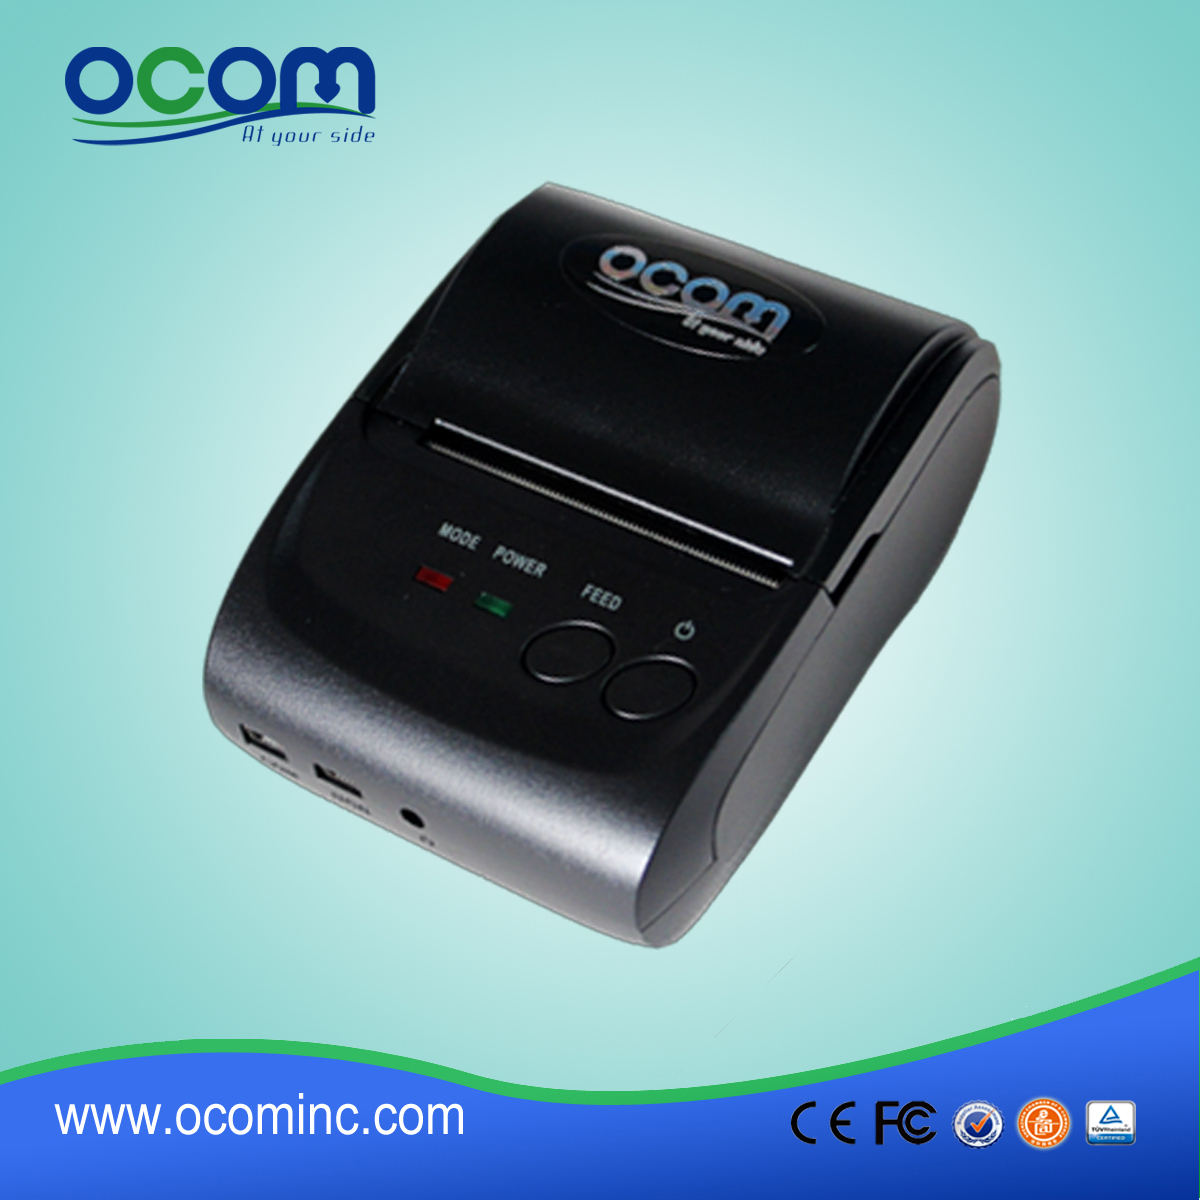 58mm Portable Bluetooth Thermal Printer with SDK